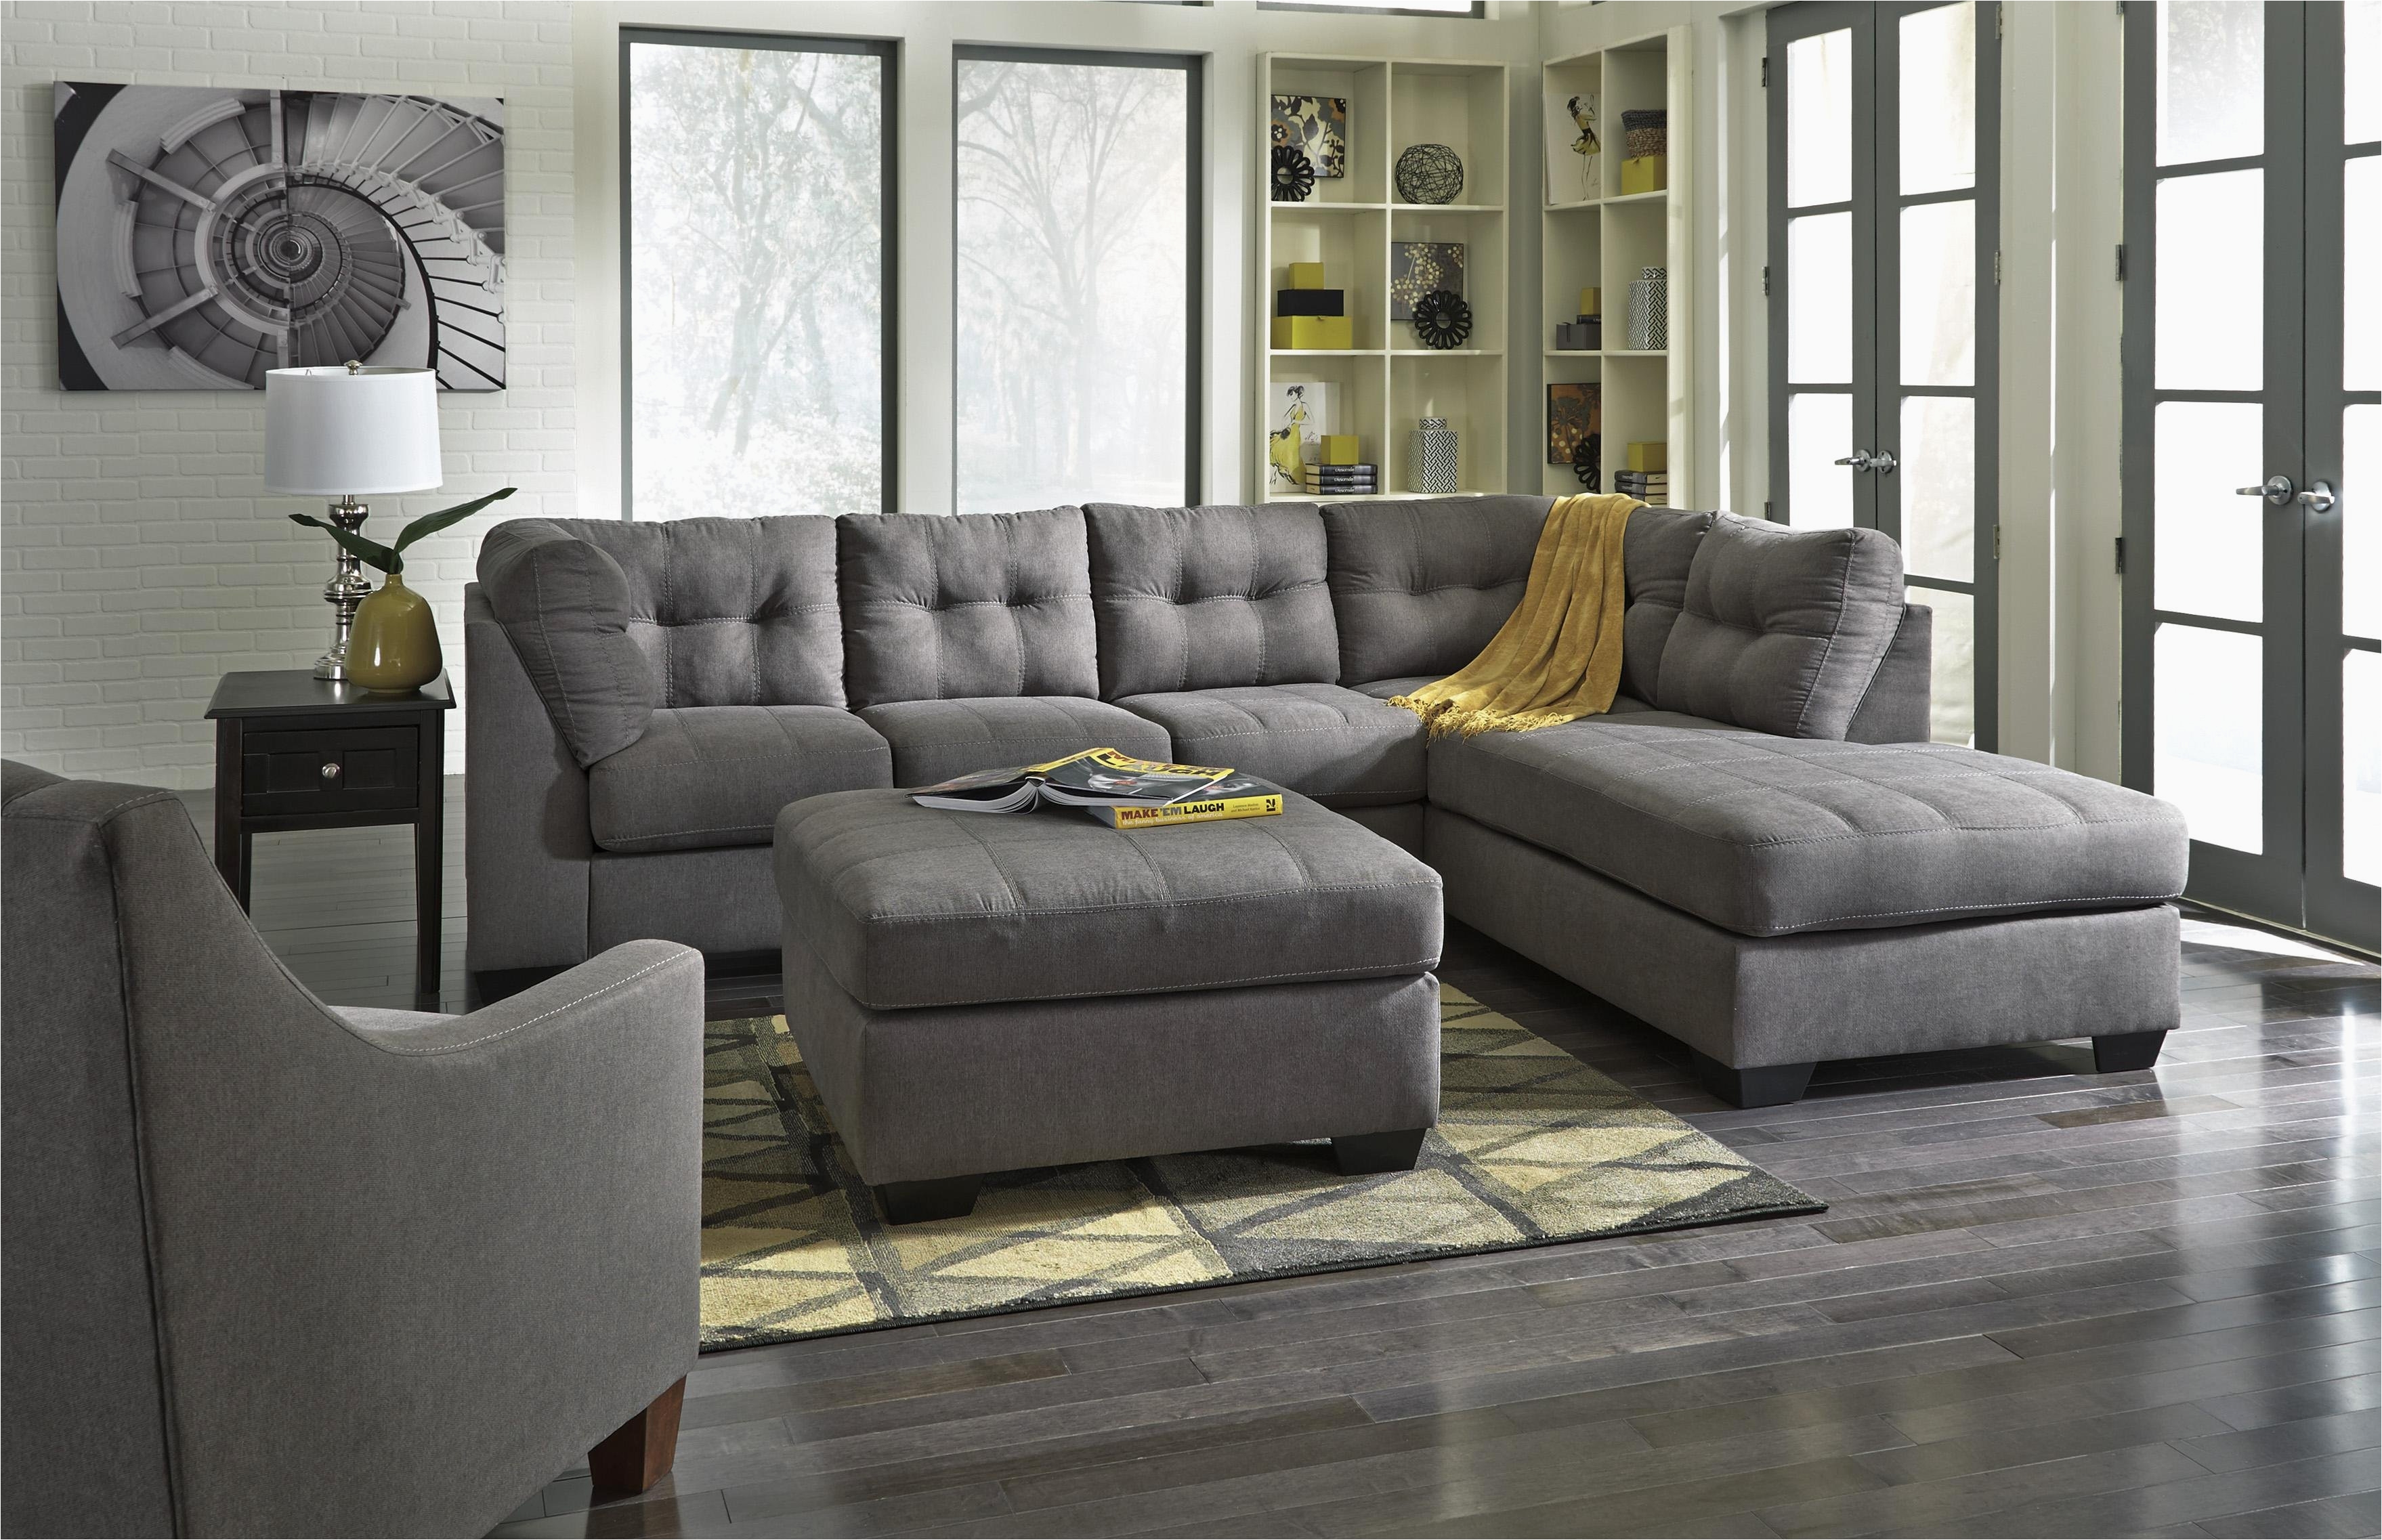 ashley furniture clearance center inspirational 21 new ashley furniture chaise sofa graphics everythingalyce gallery of ashley